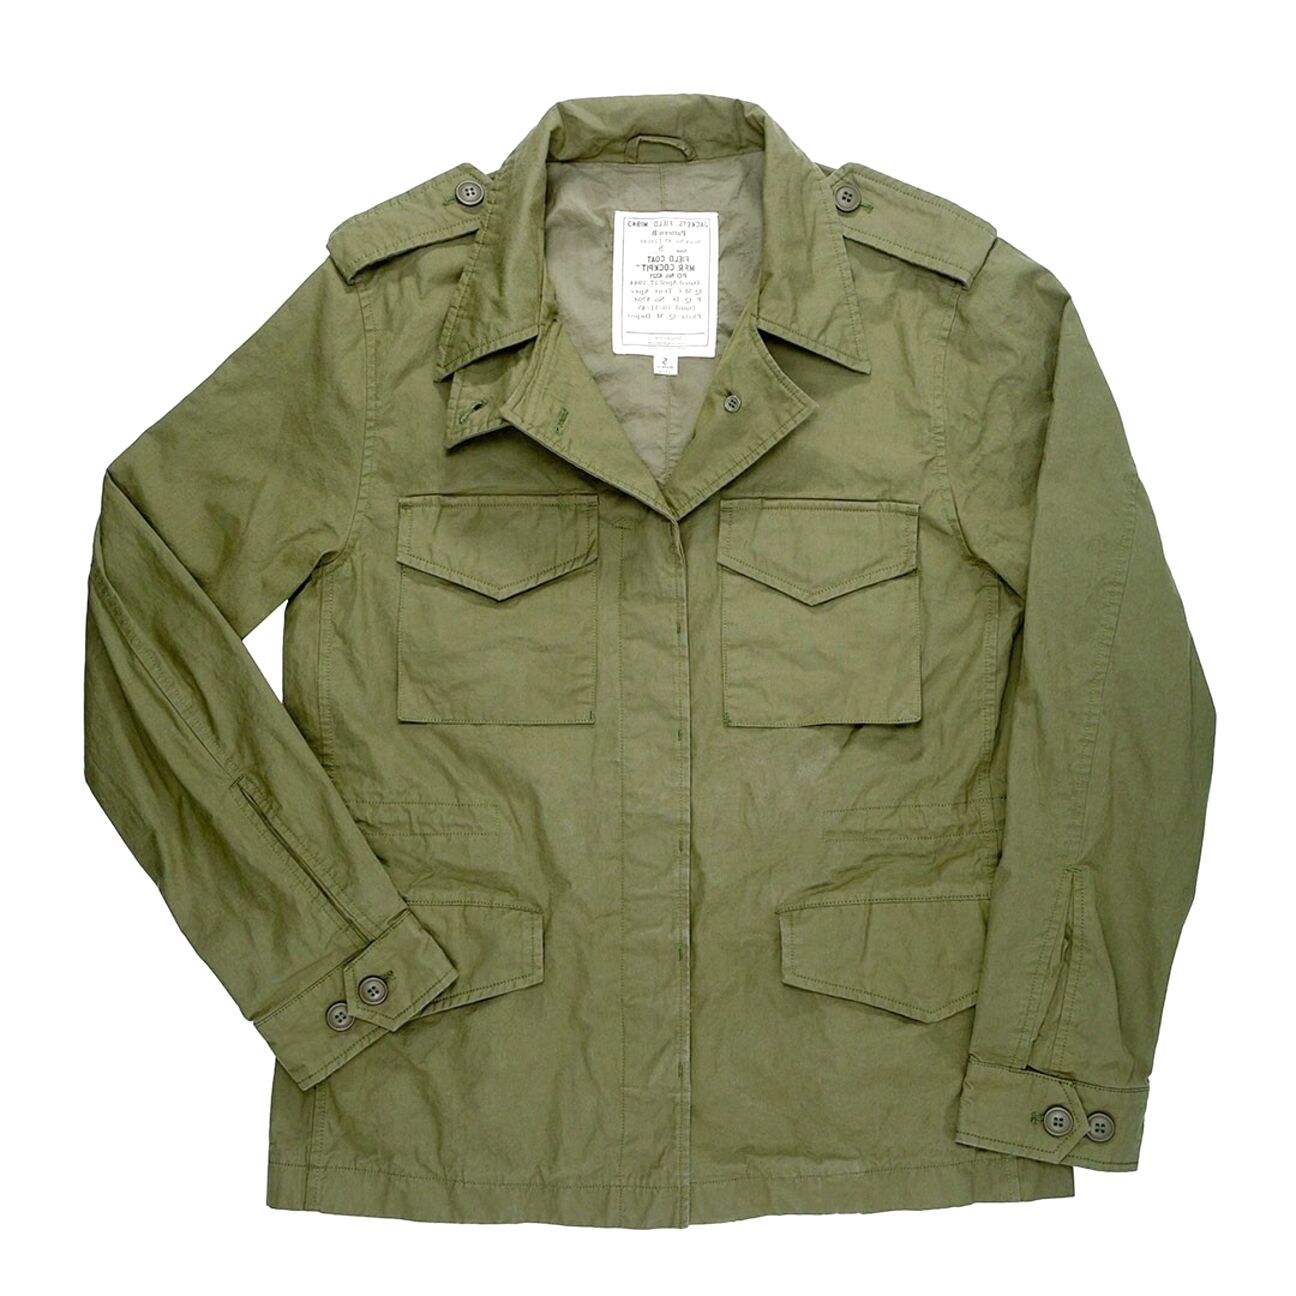 M43 Jacket for sale in UK | 59 used M43 Jackets